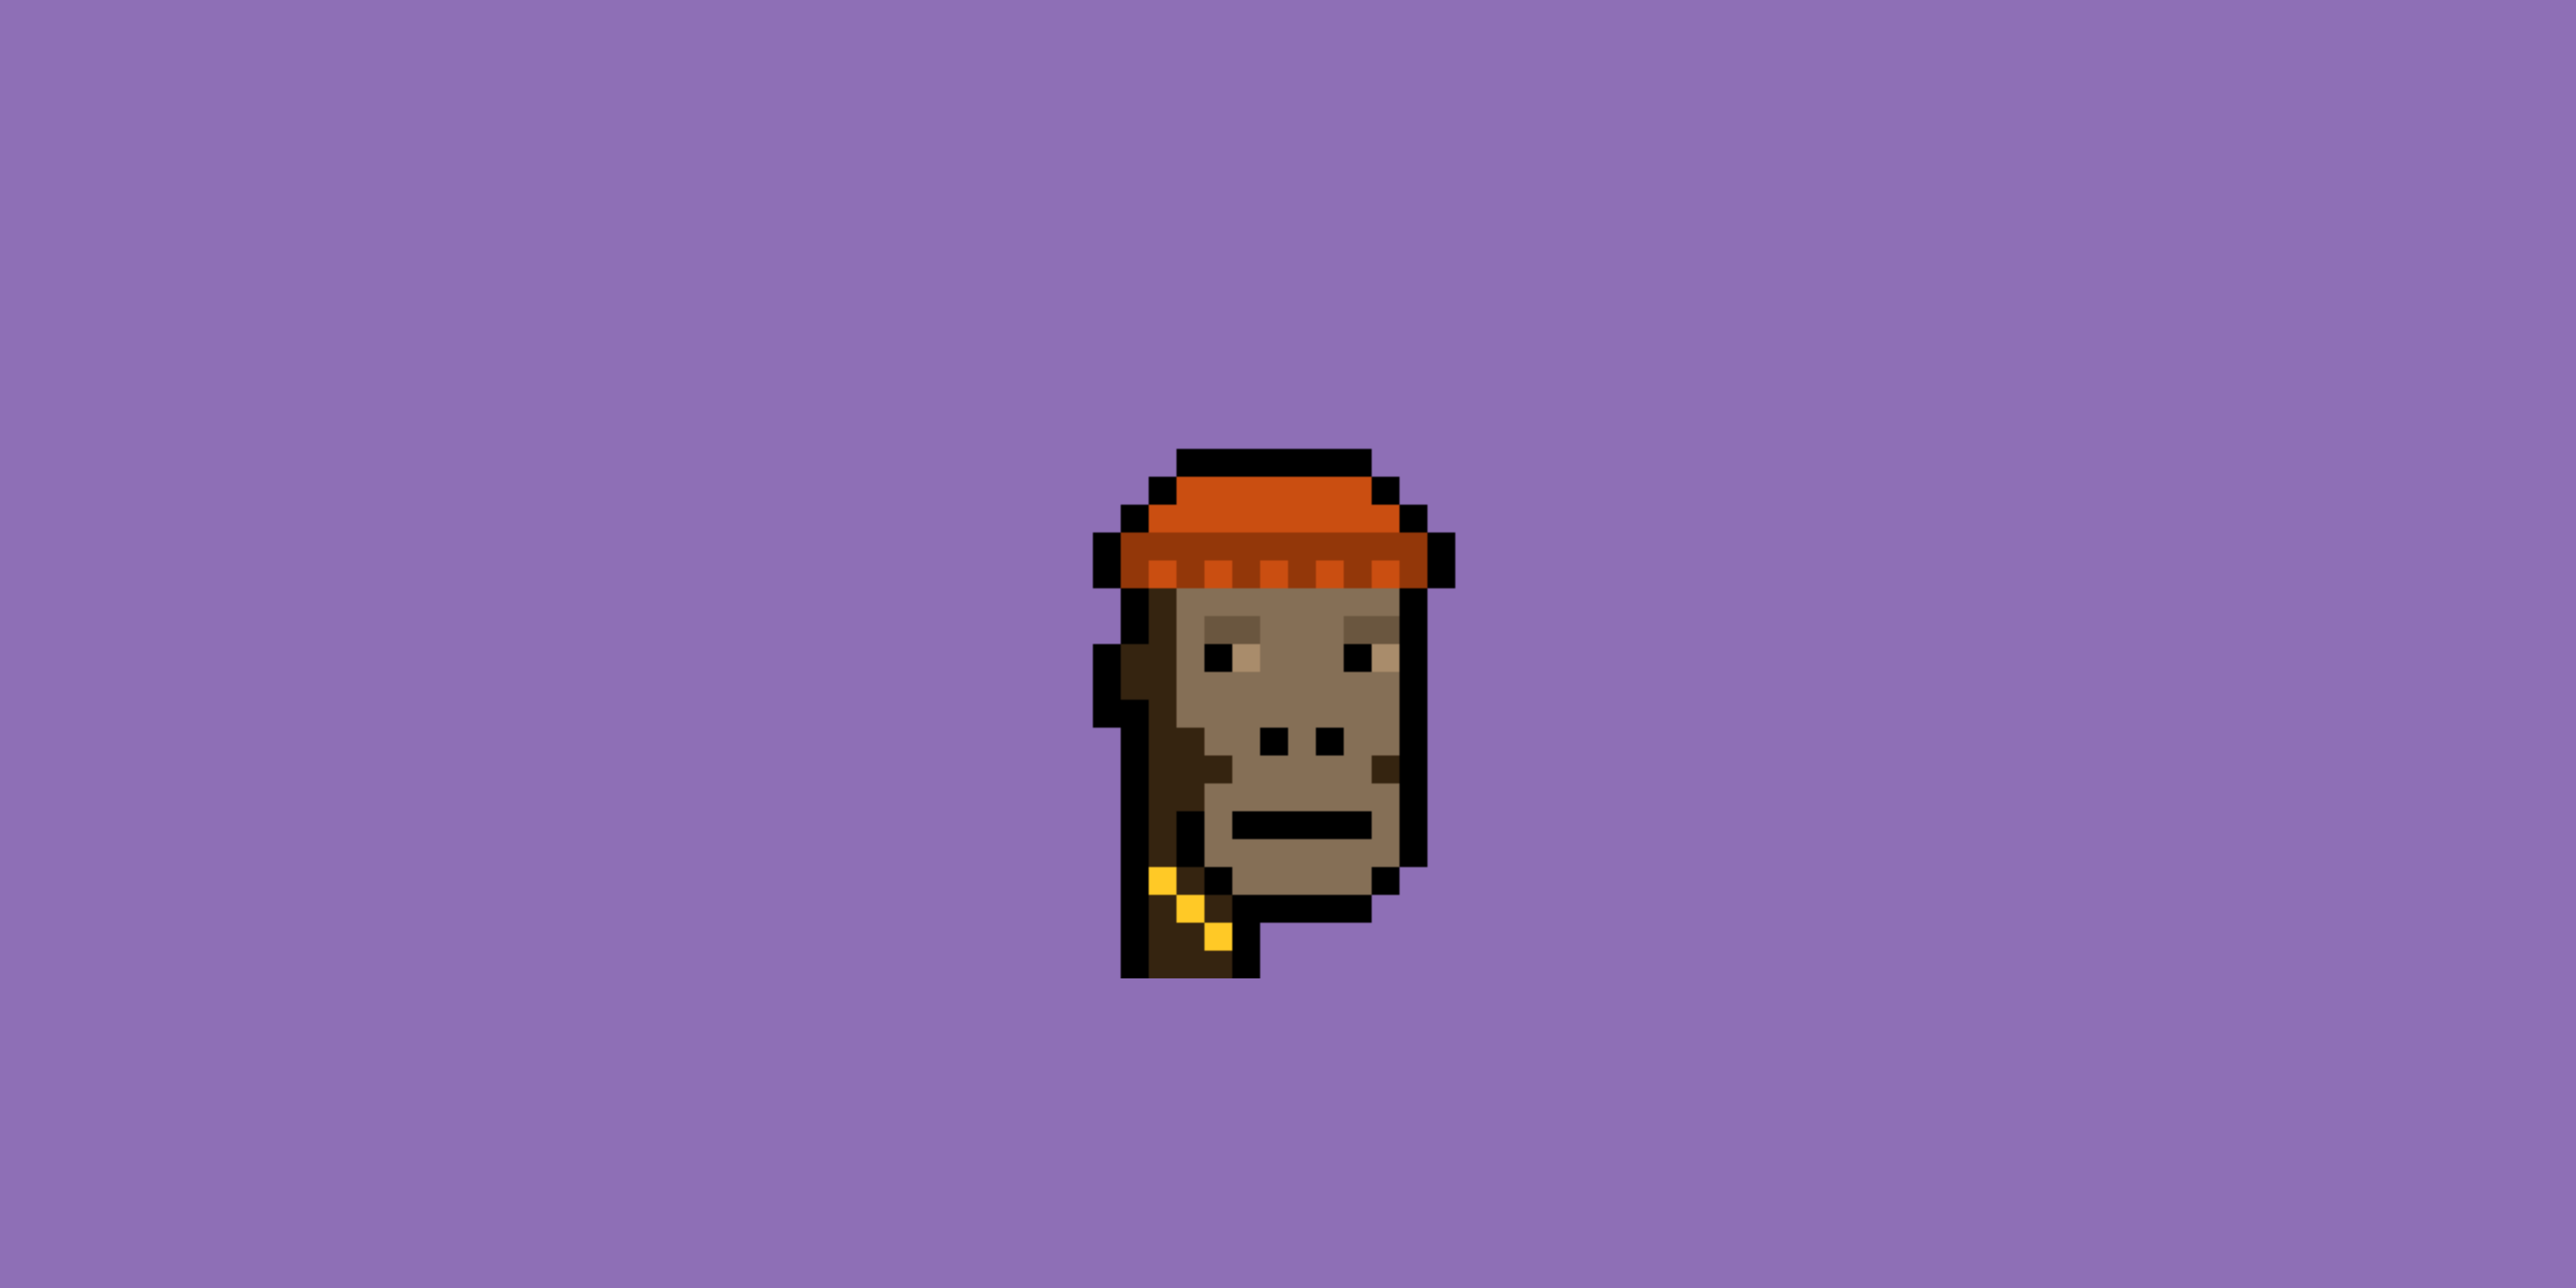 An Ape CryptoPunk with a knitted cap and a gold chain.